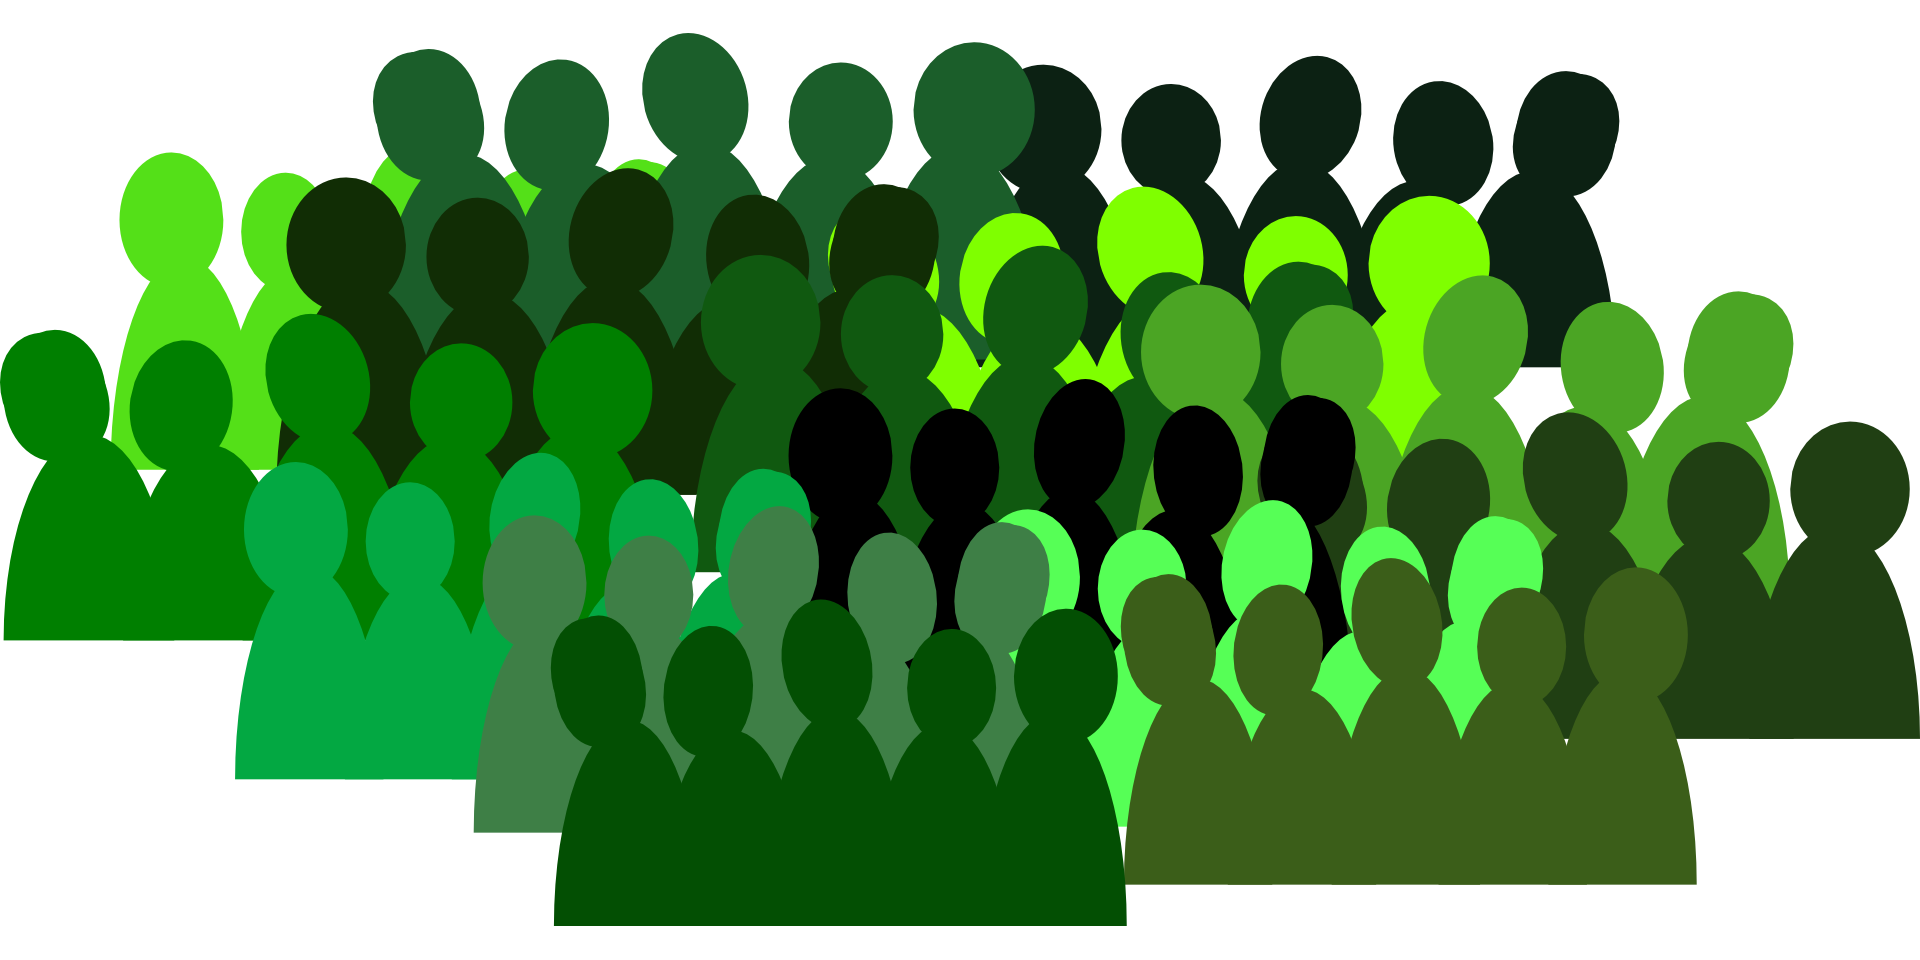 People team isolated connection. Crowd clipart group travel